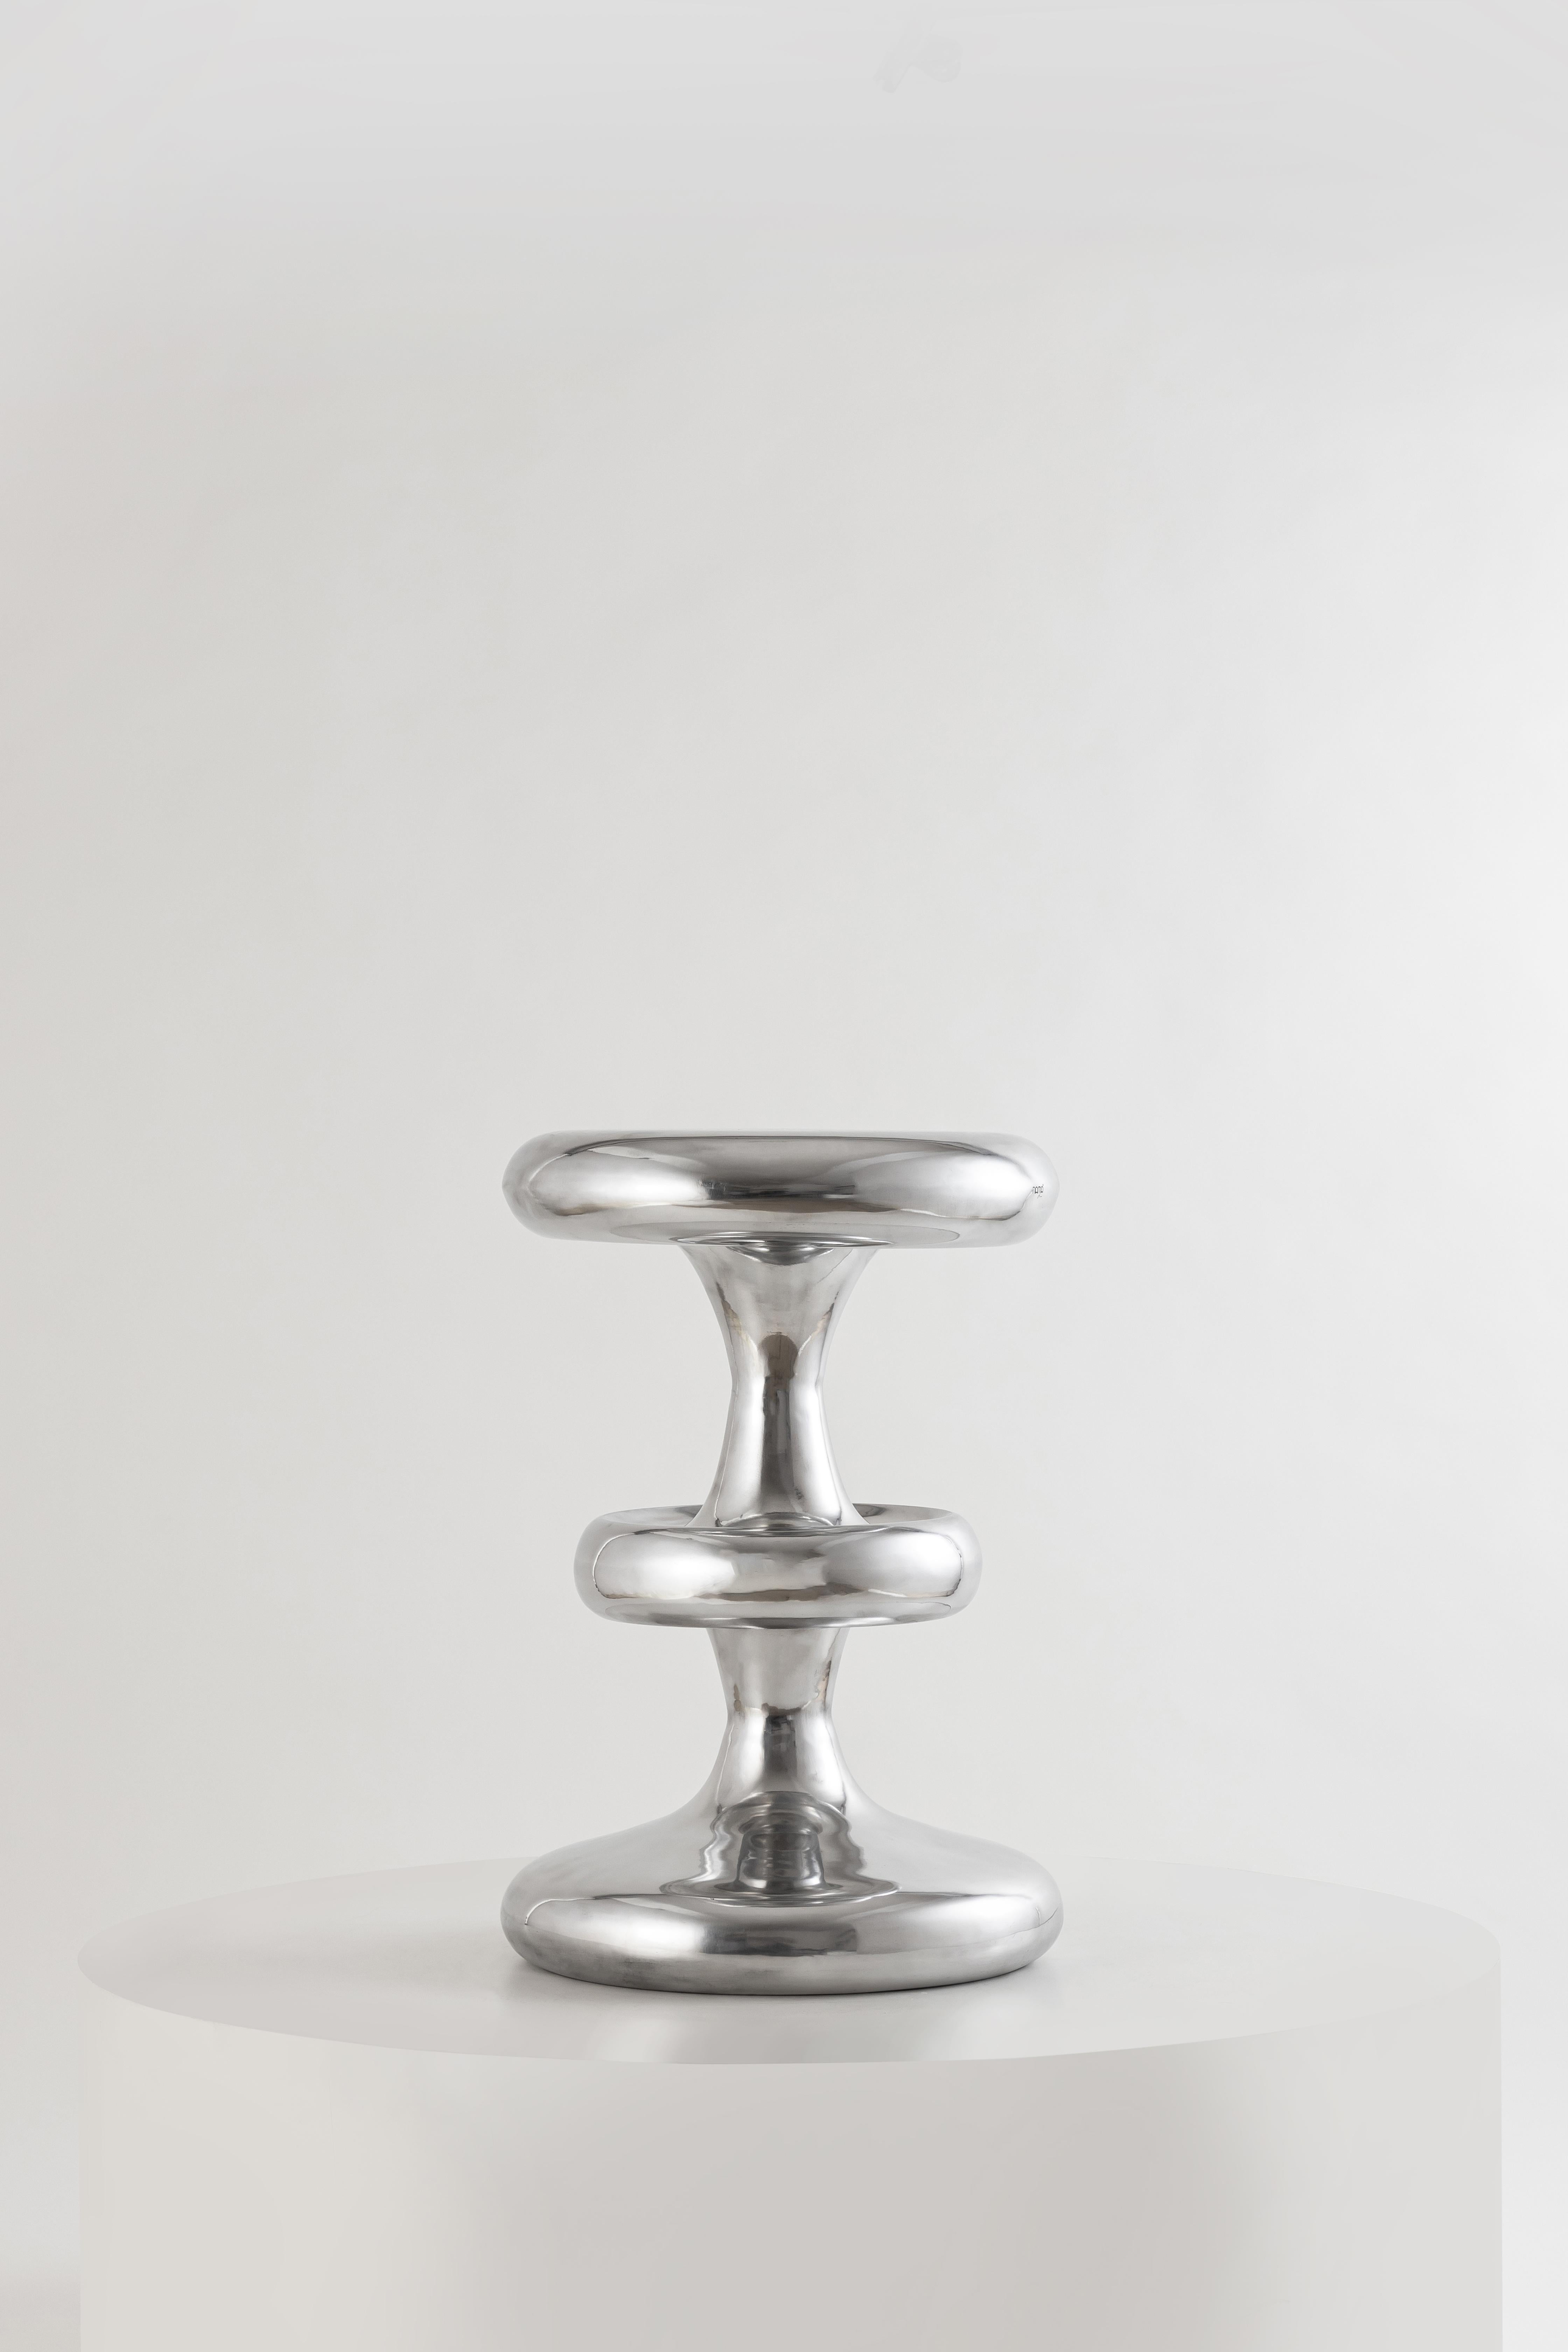 We dropped the Atom side table to show that a few bombs do spread beauty and smiles! This distinct side table, which has all the right curves in the right places, is here to add weight to your space and explode it with glamour.

Why do we call it